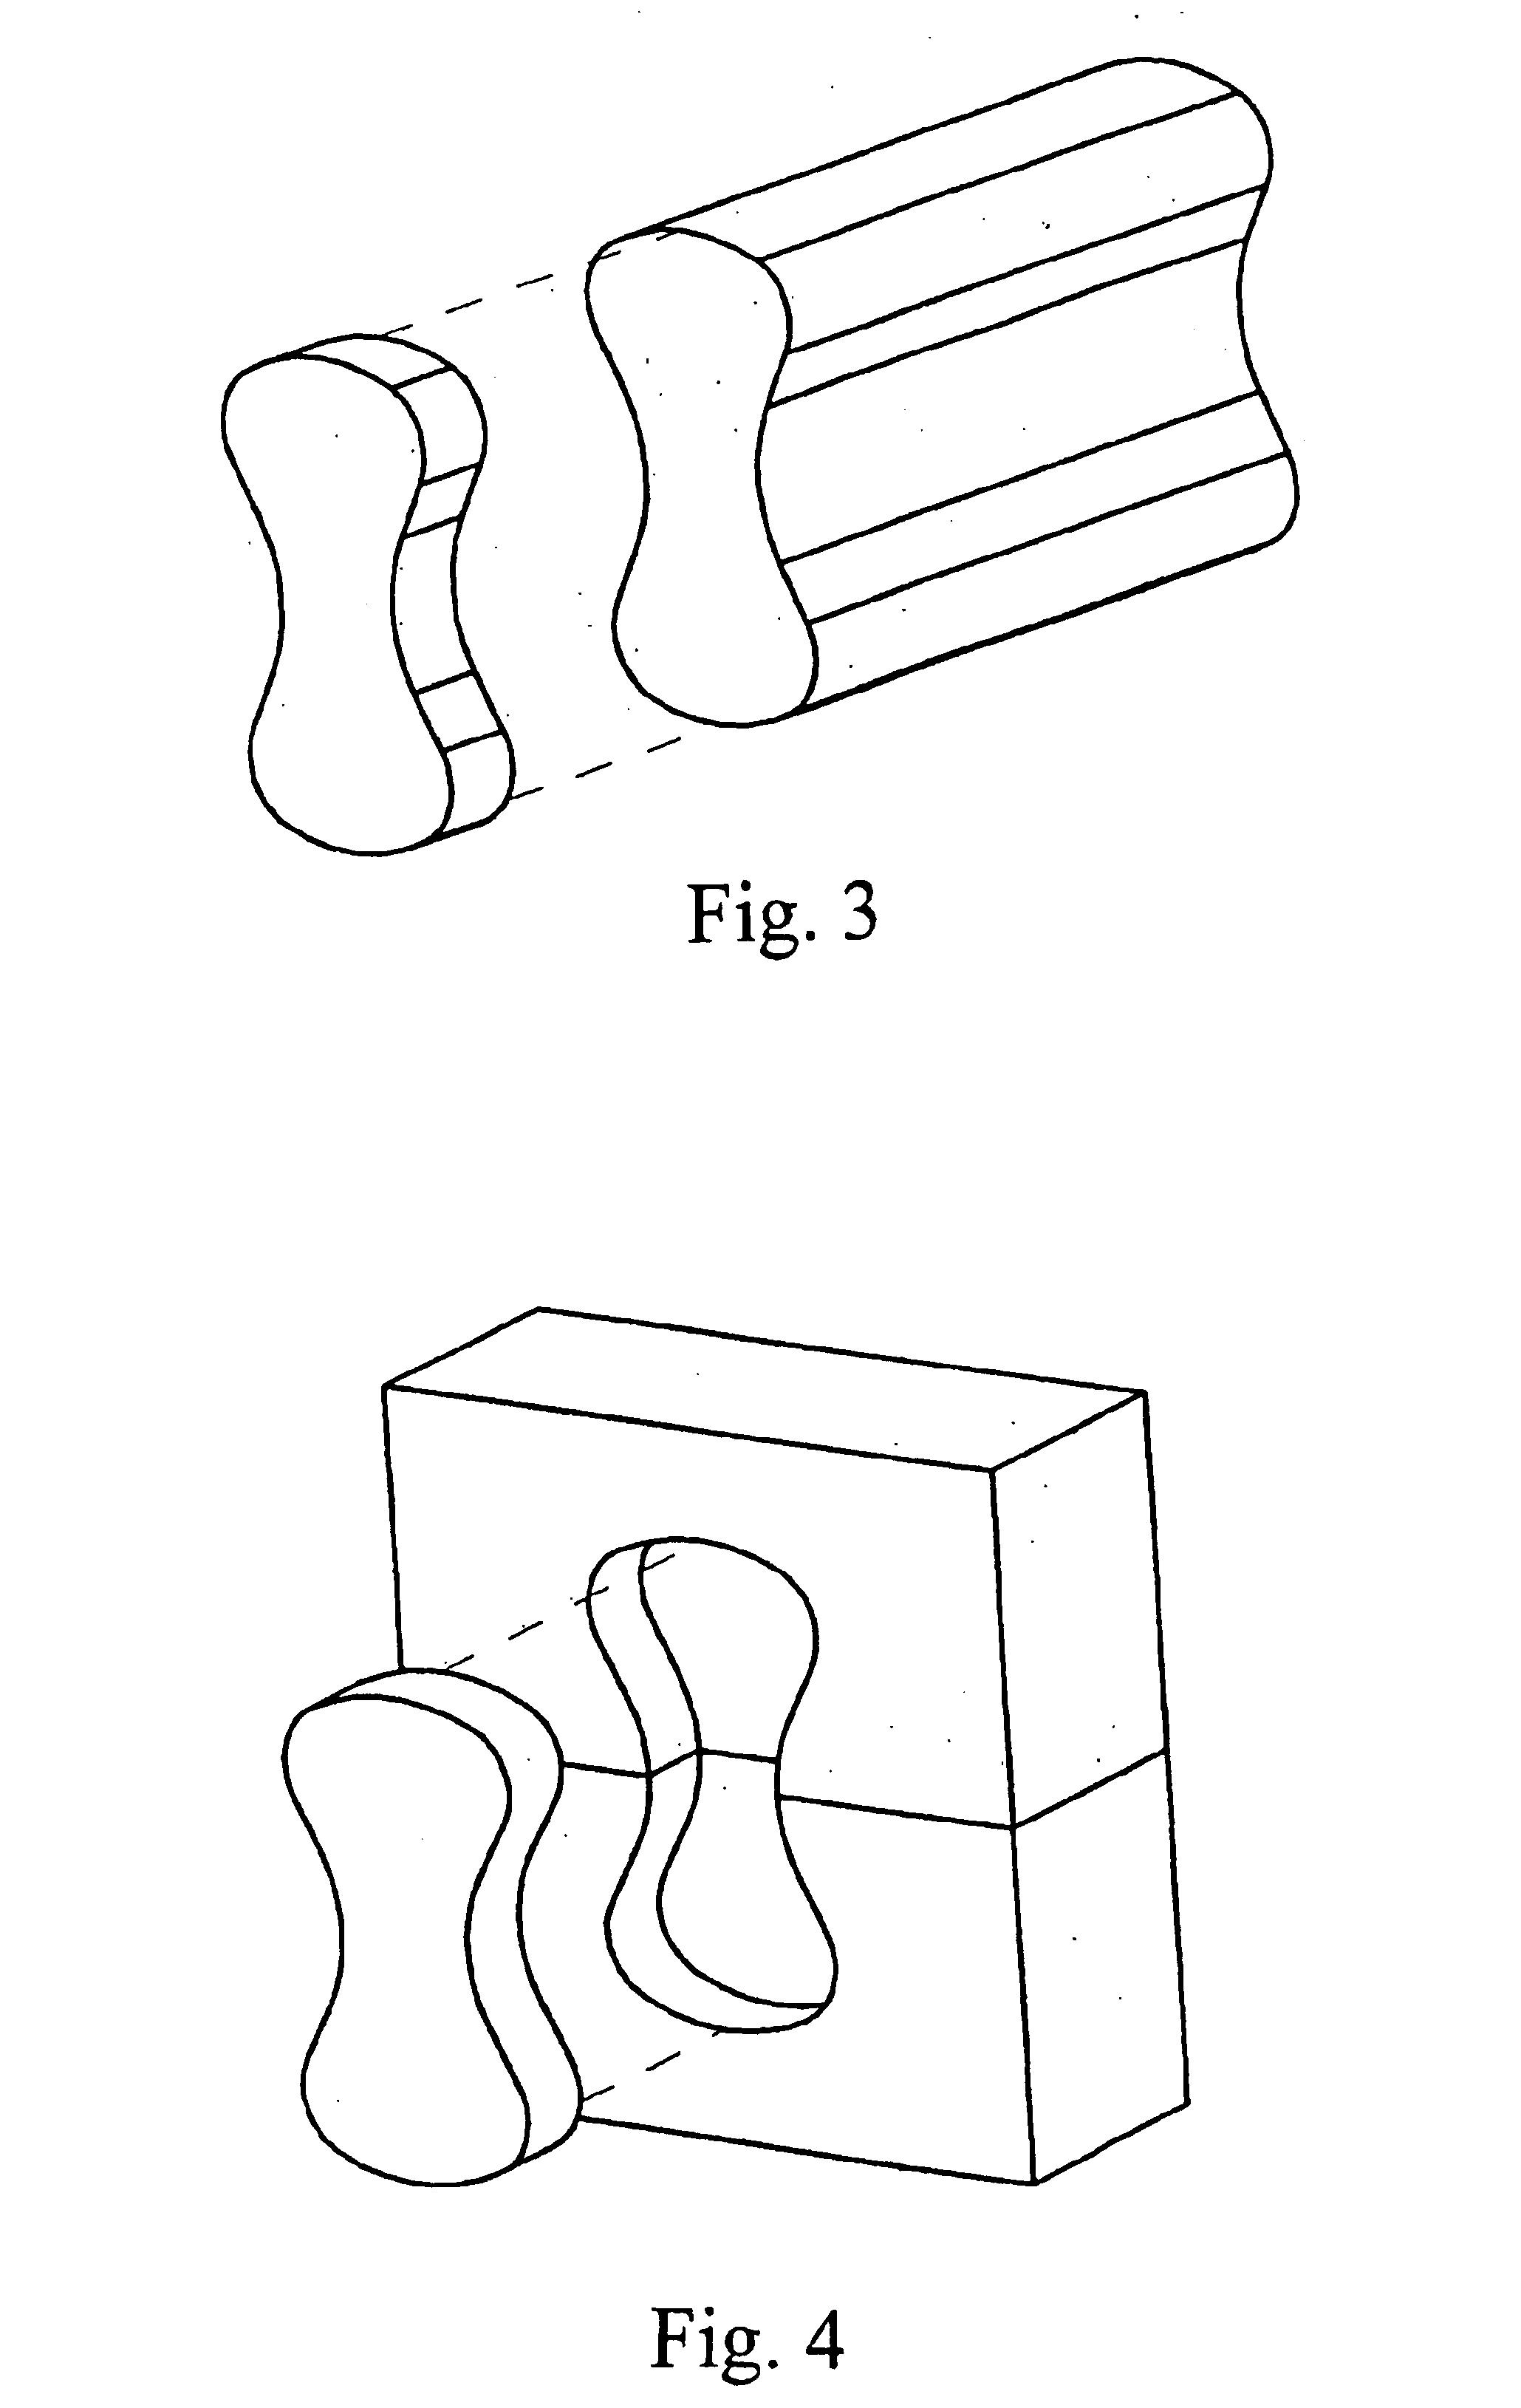 Methods for making composite bonded structures